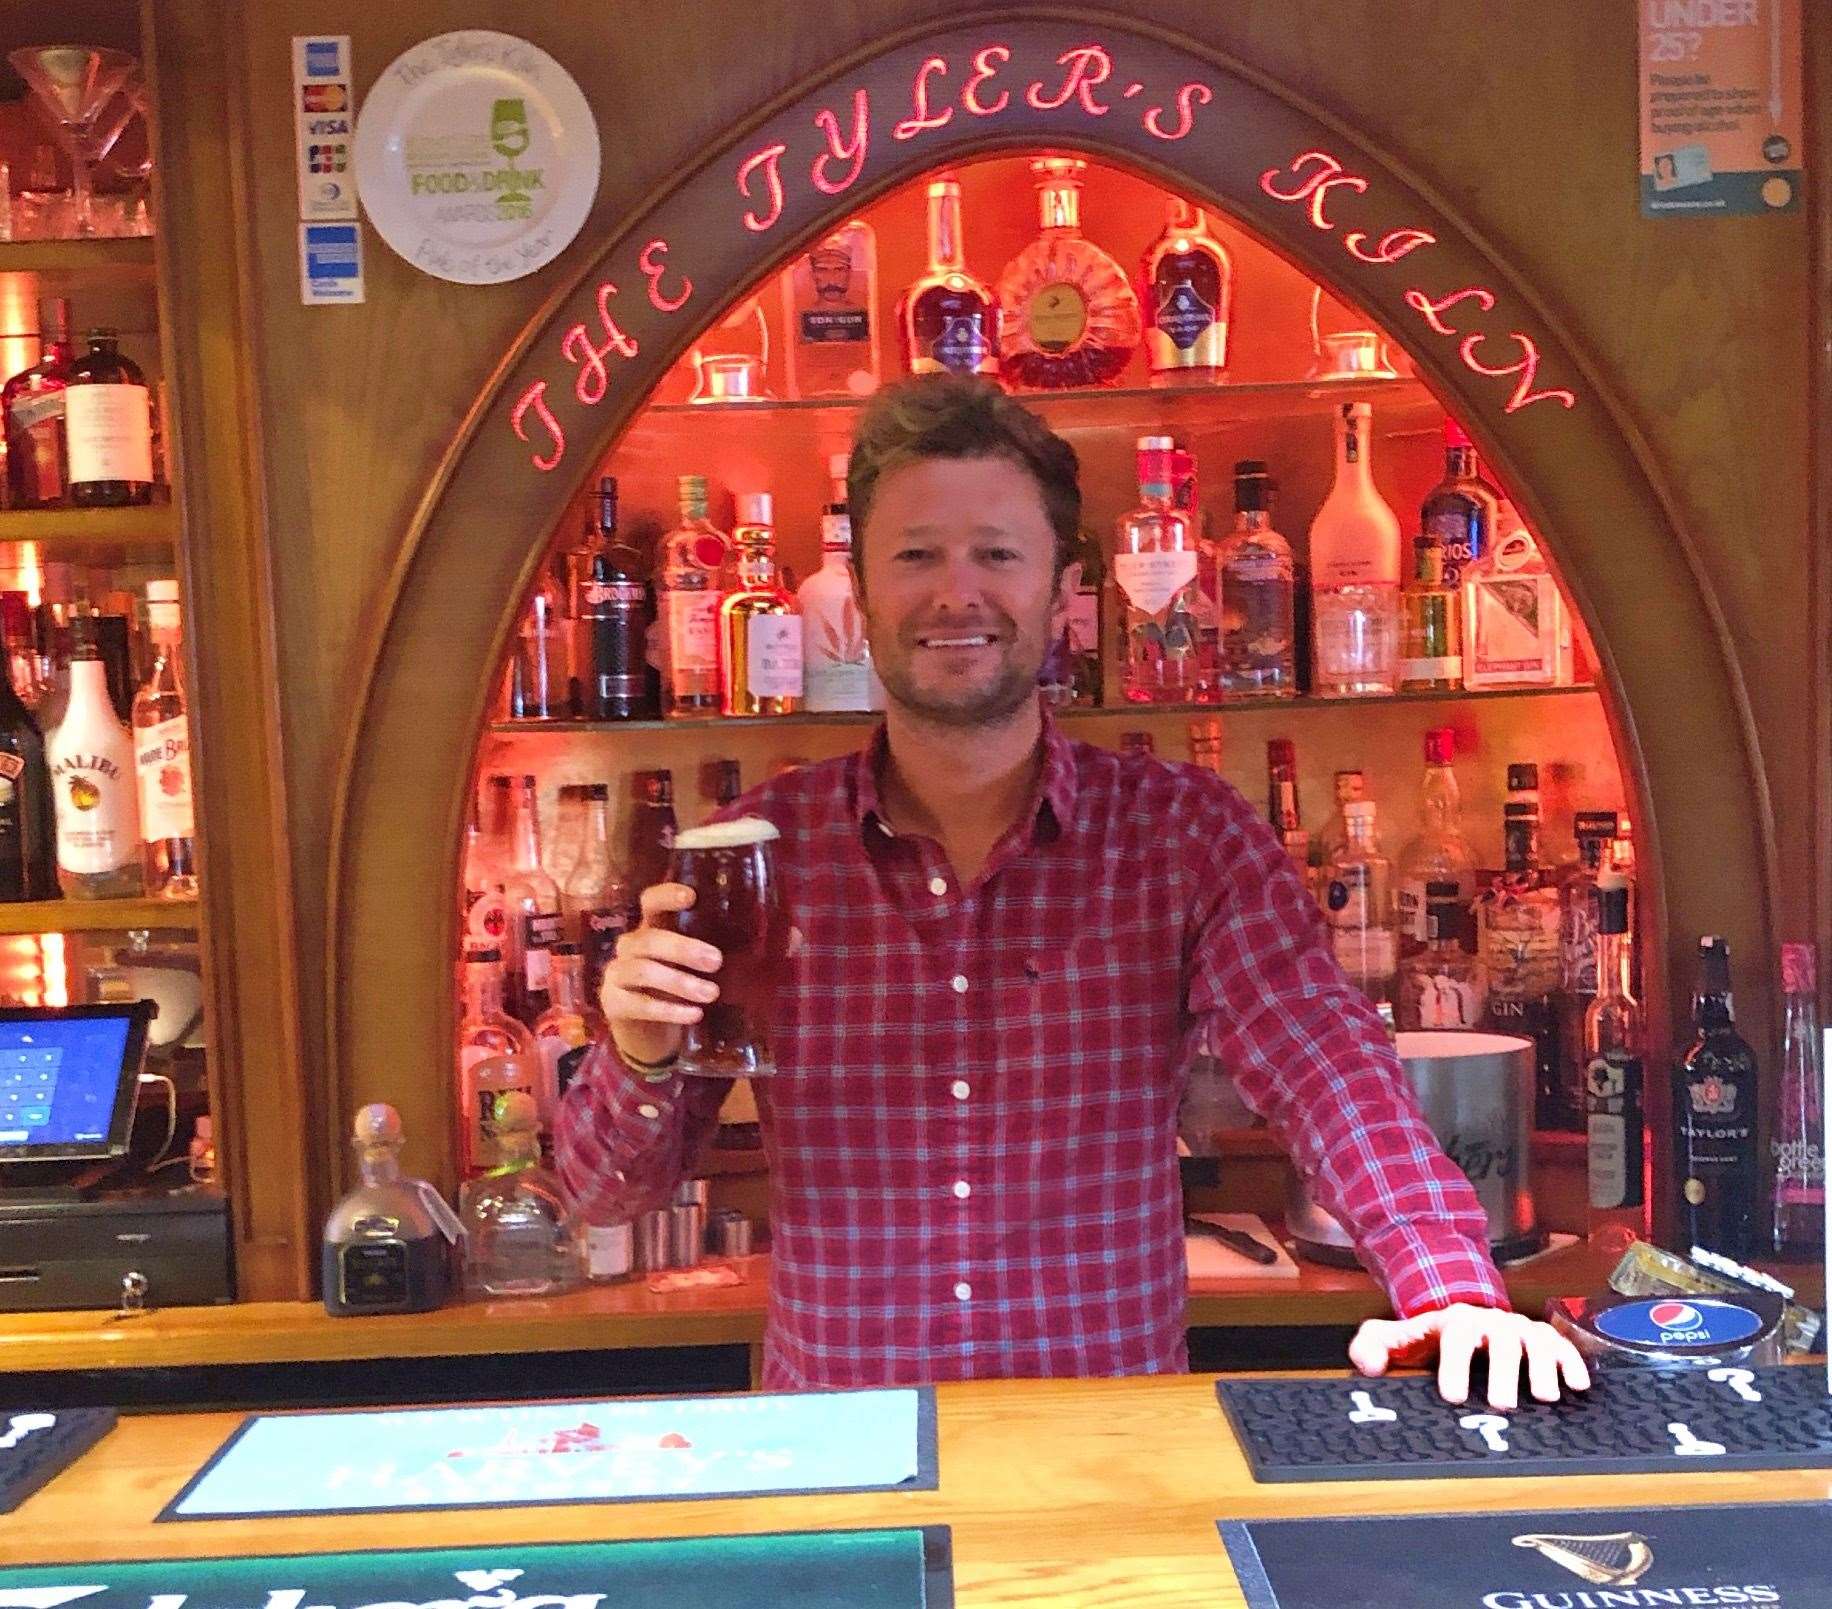 Allister Collins says his priority for the pub has always been serving the local community